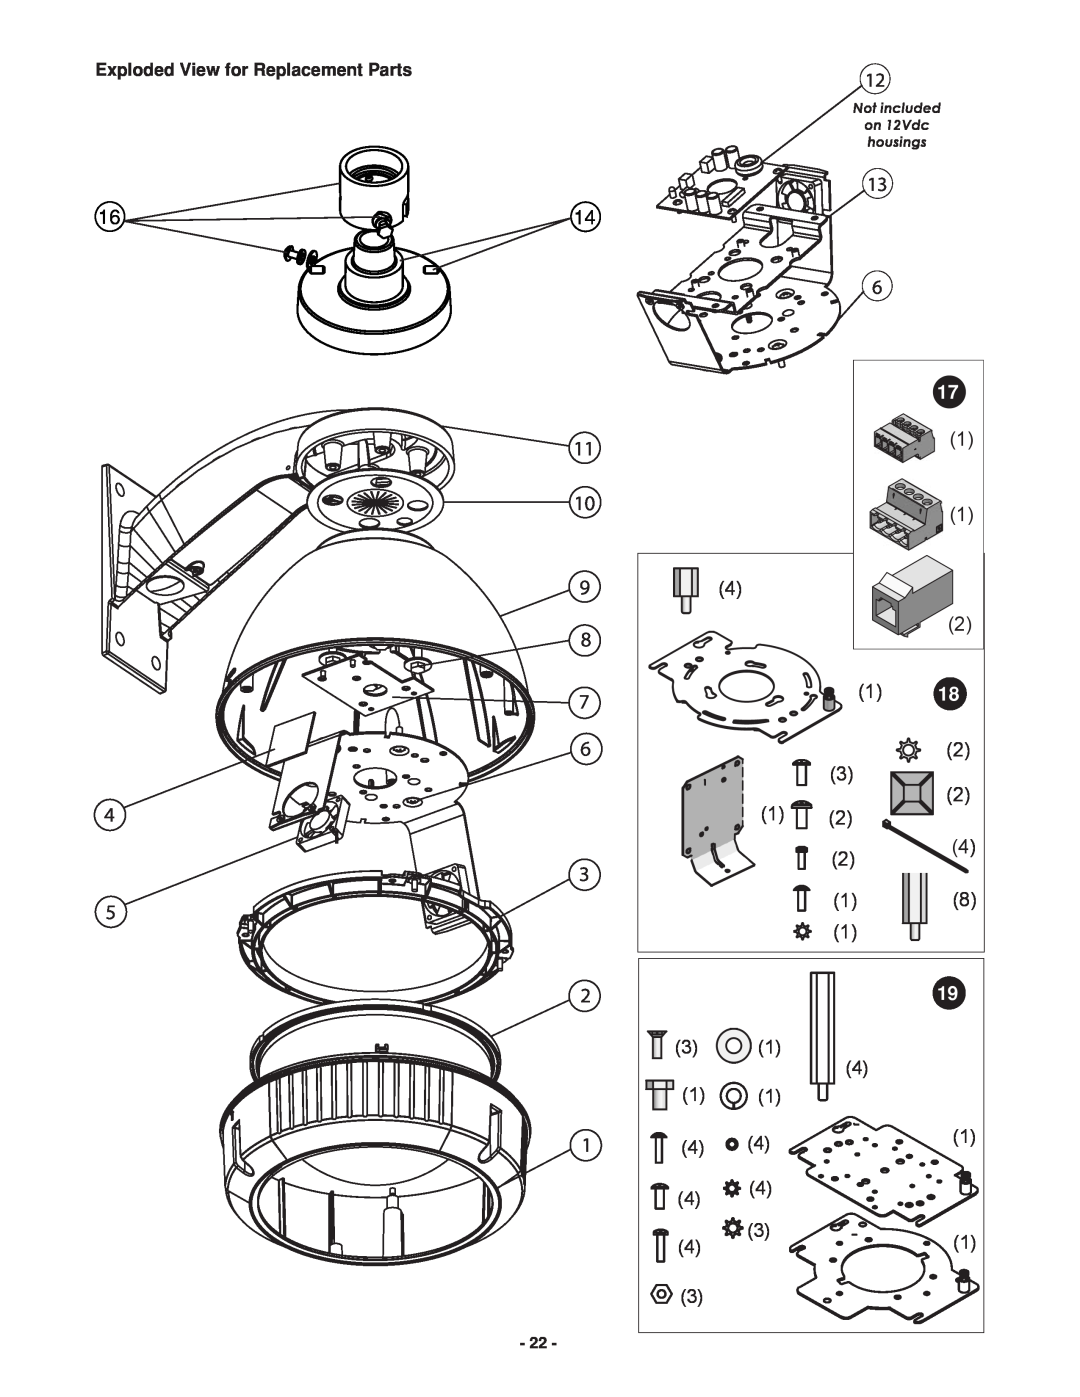 Canon FDW75C12N, FDP75C12N manual Exploded View for Replacement Parts, Not included, on 12Vdc, housings 